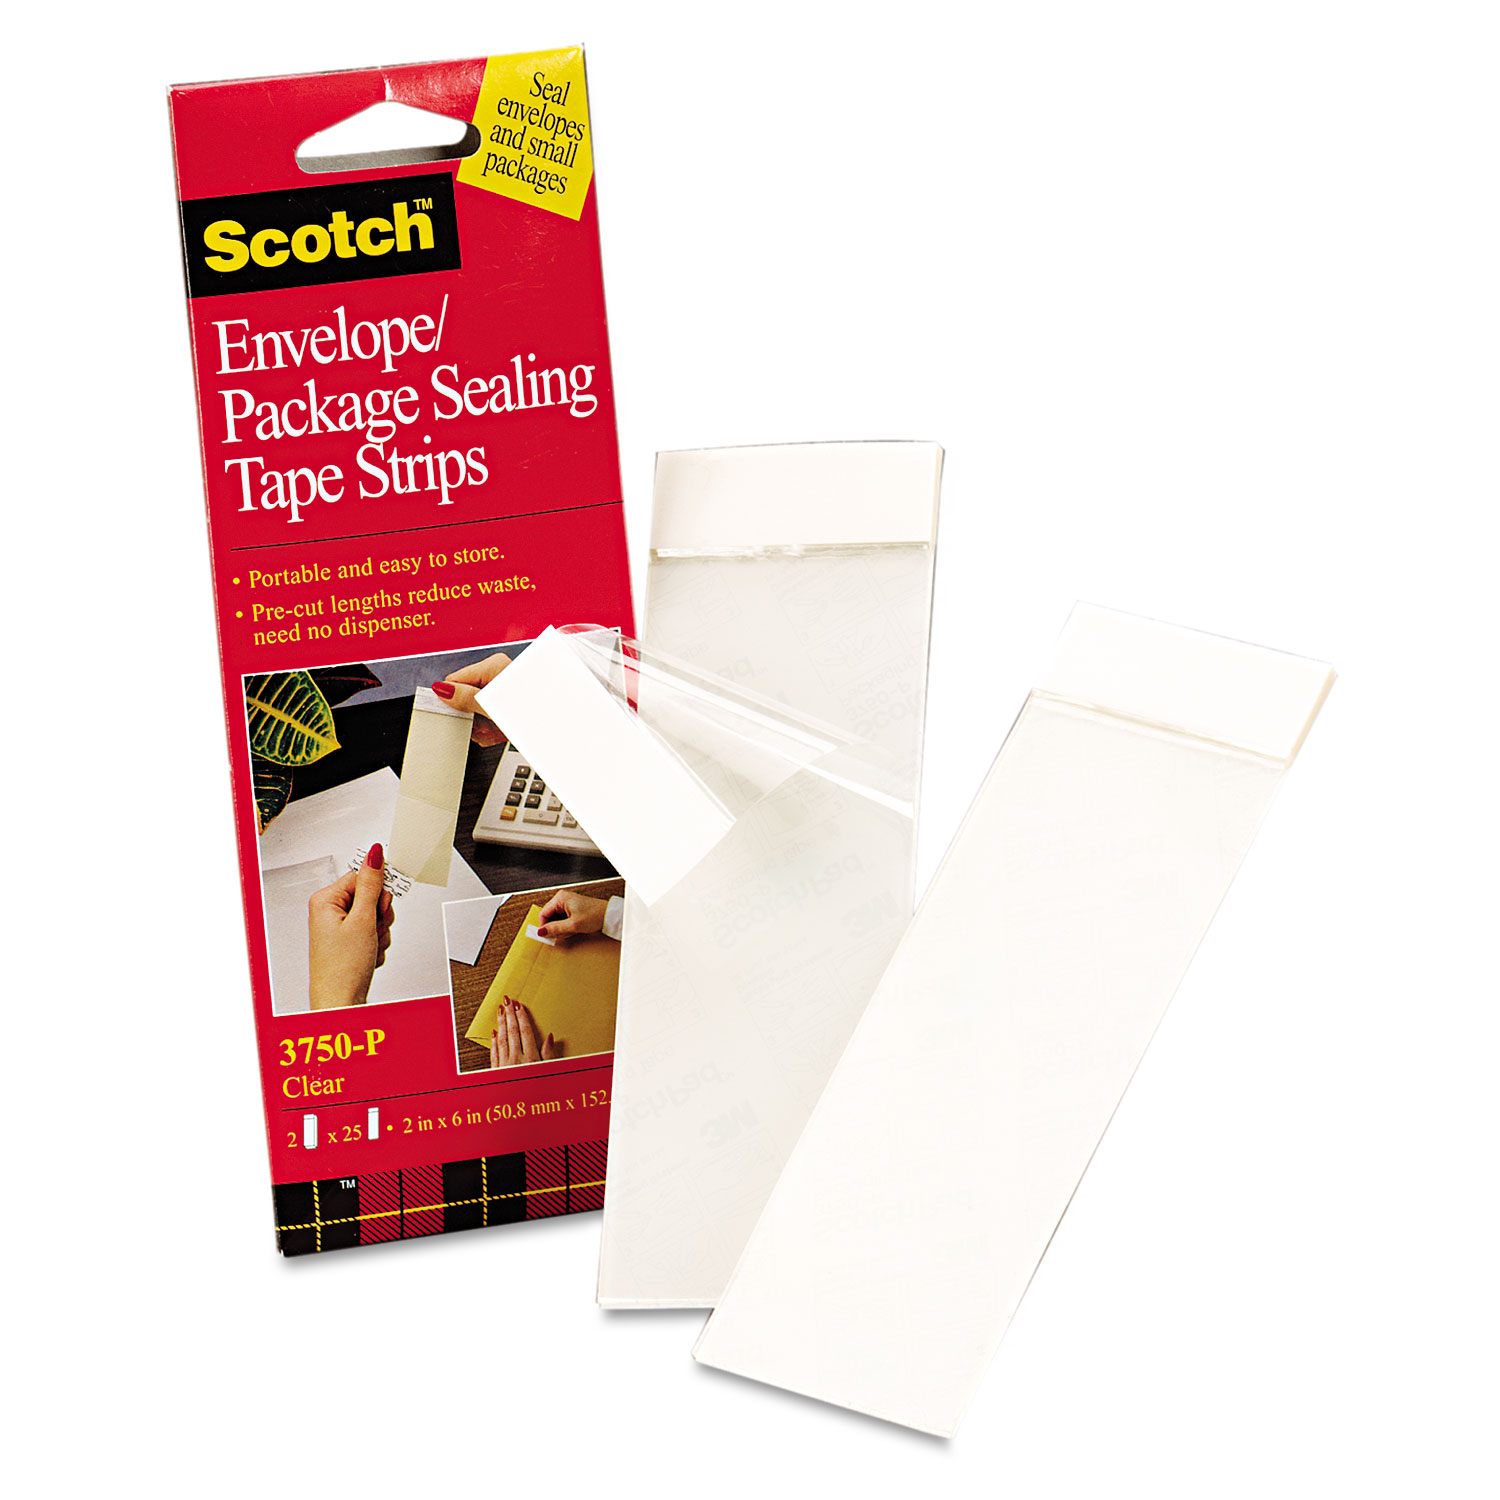  Scotch 3750P Envelope/Package Sealing Tape Strips, 2 x 6, Clear, 50/Pack (MMM3750P2CR) 